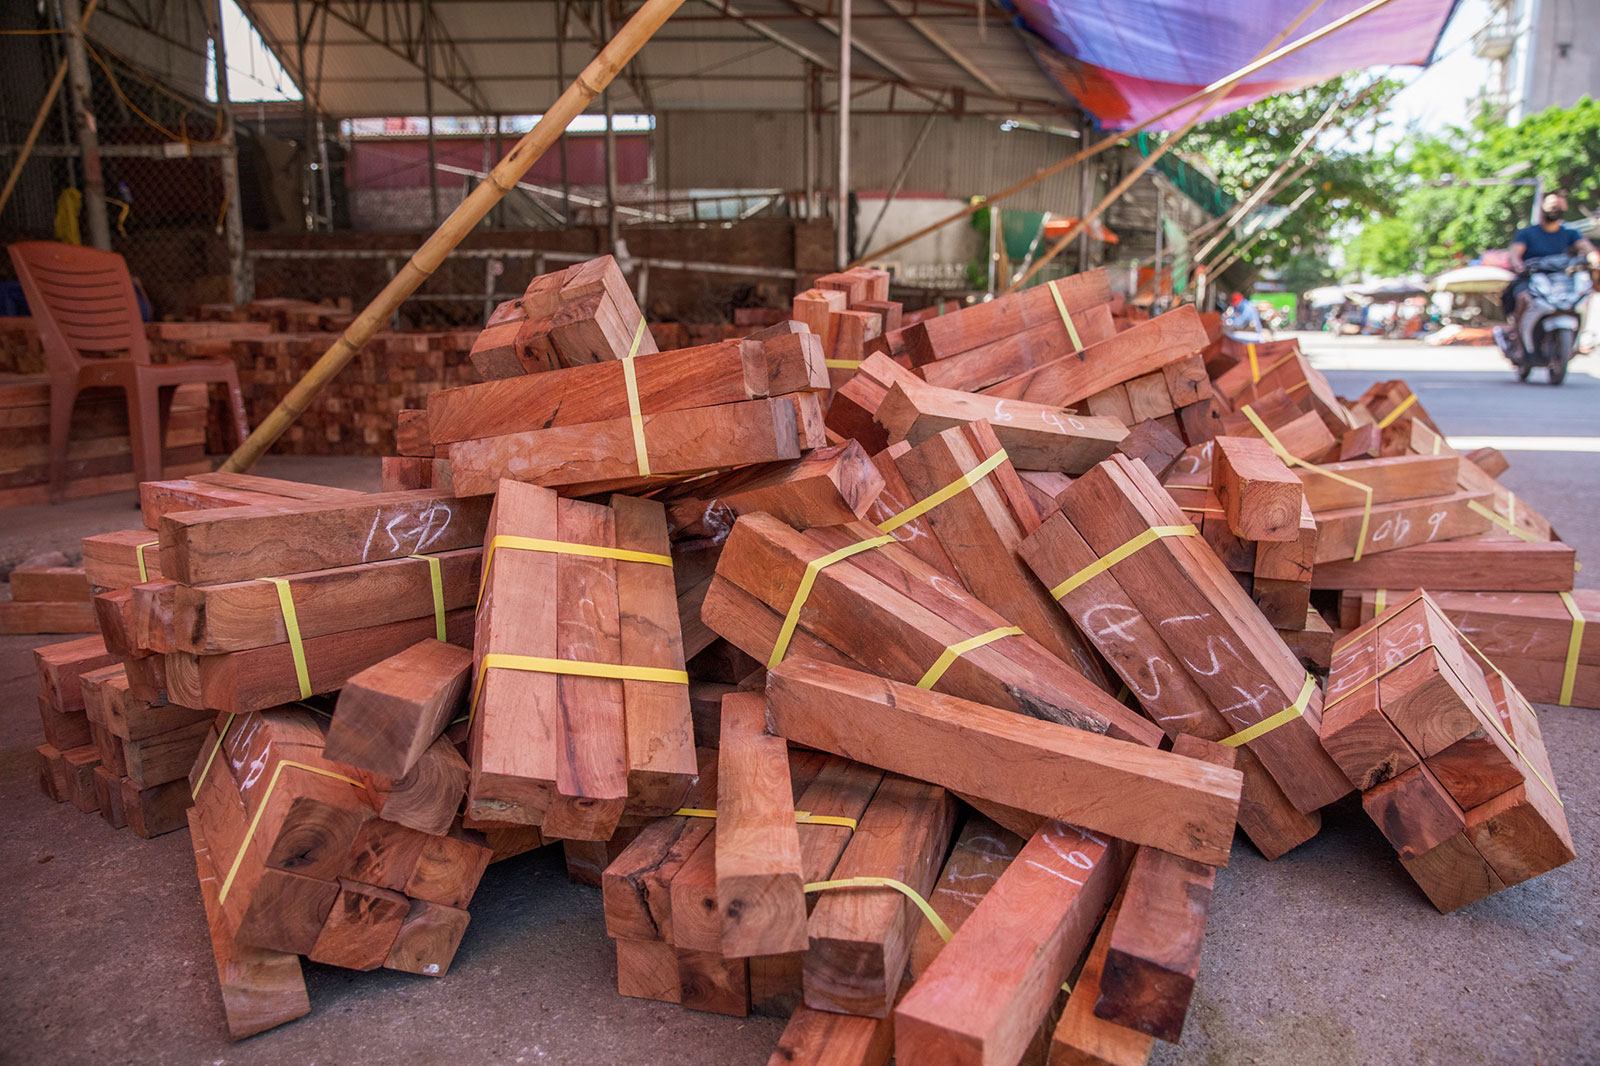 Imported timber for production in Dong Ky, Bac Ninh Province. © GIZ/Binh Dang